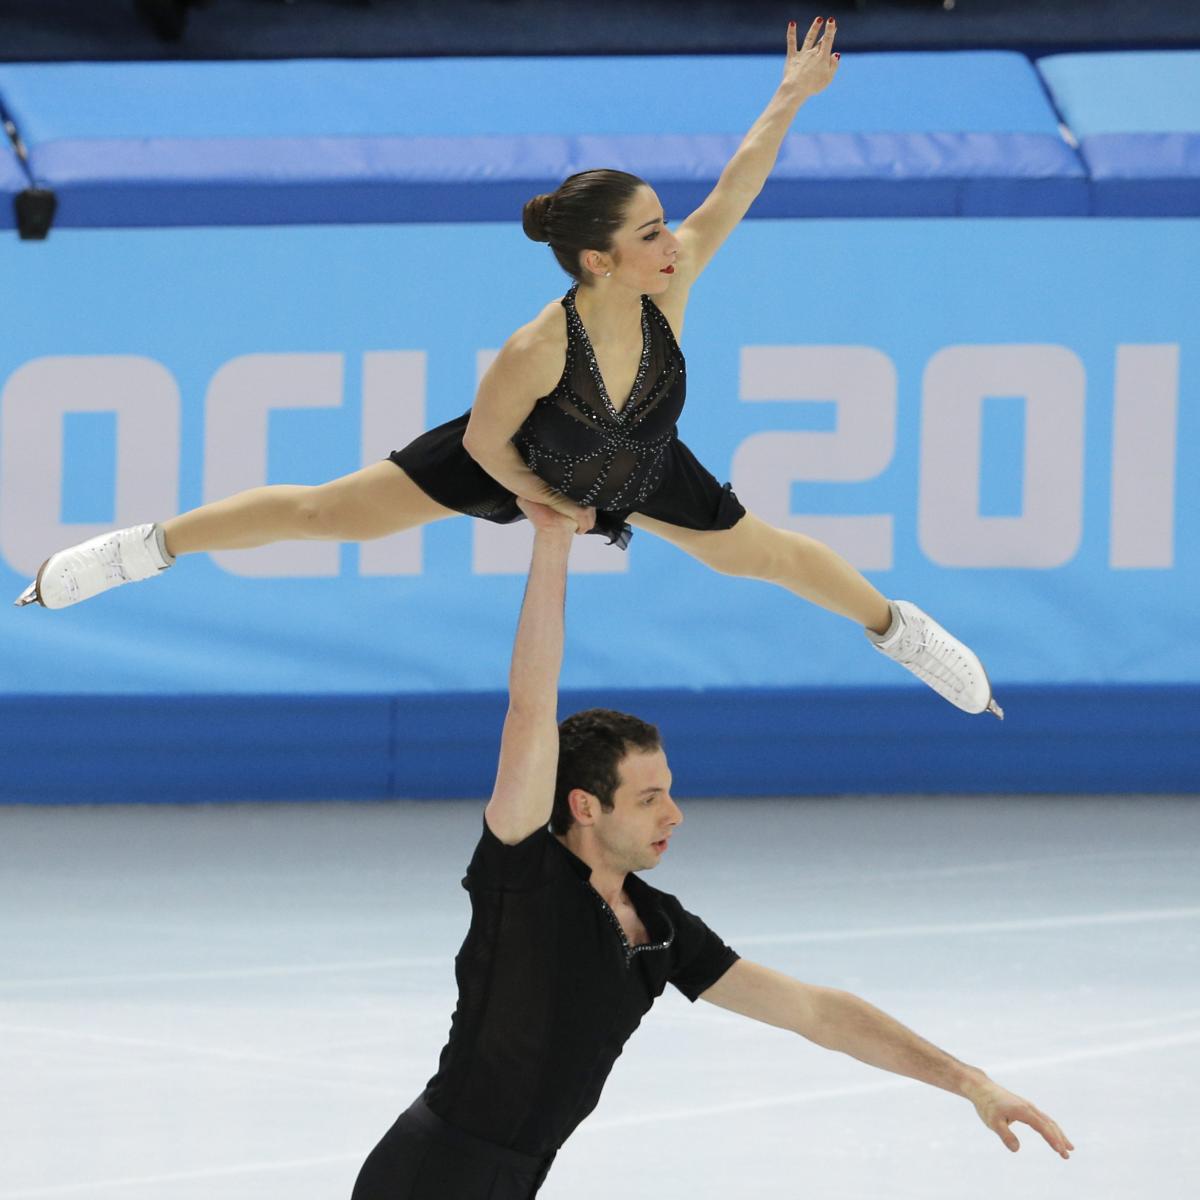 Olympic Figure Skating Schedule 2014: TV Info and Top Storylines in Sochi | Bleacher Report